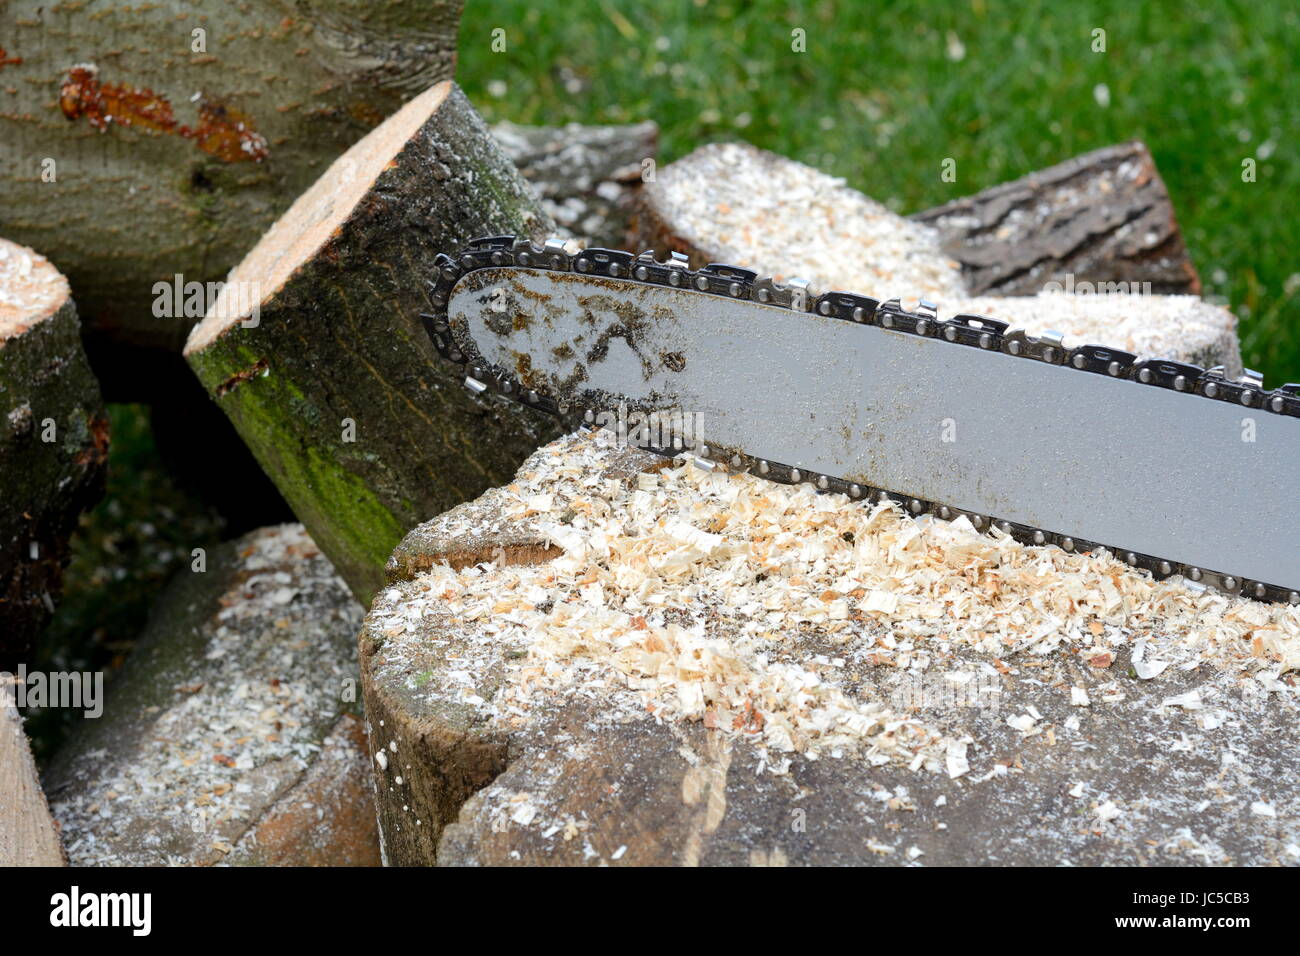 sawing wood with chainsaw Stock Photo